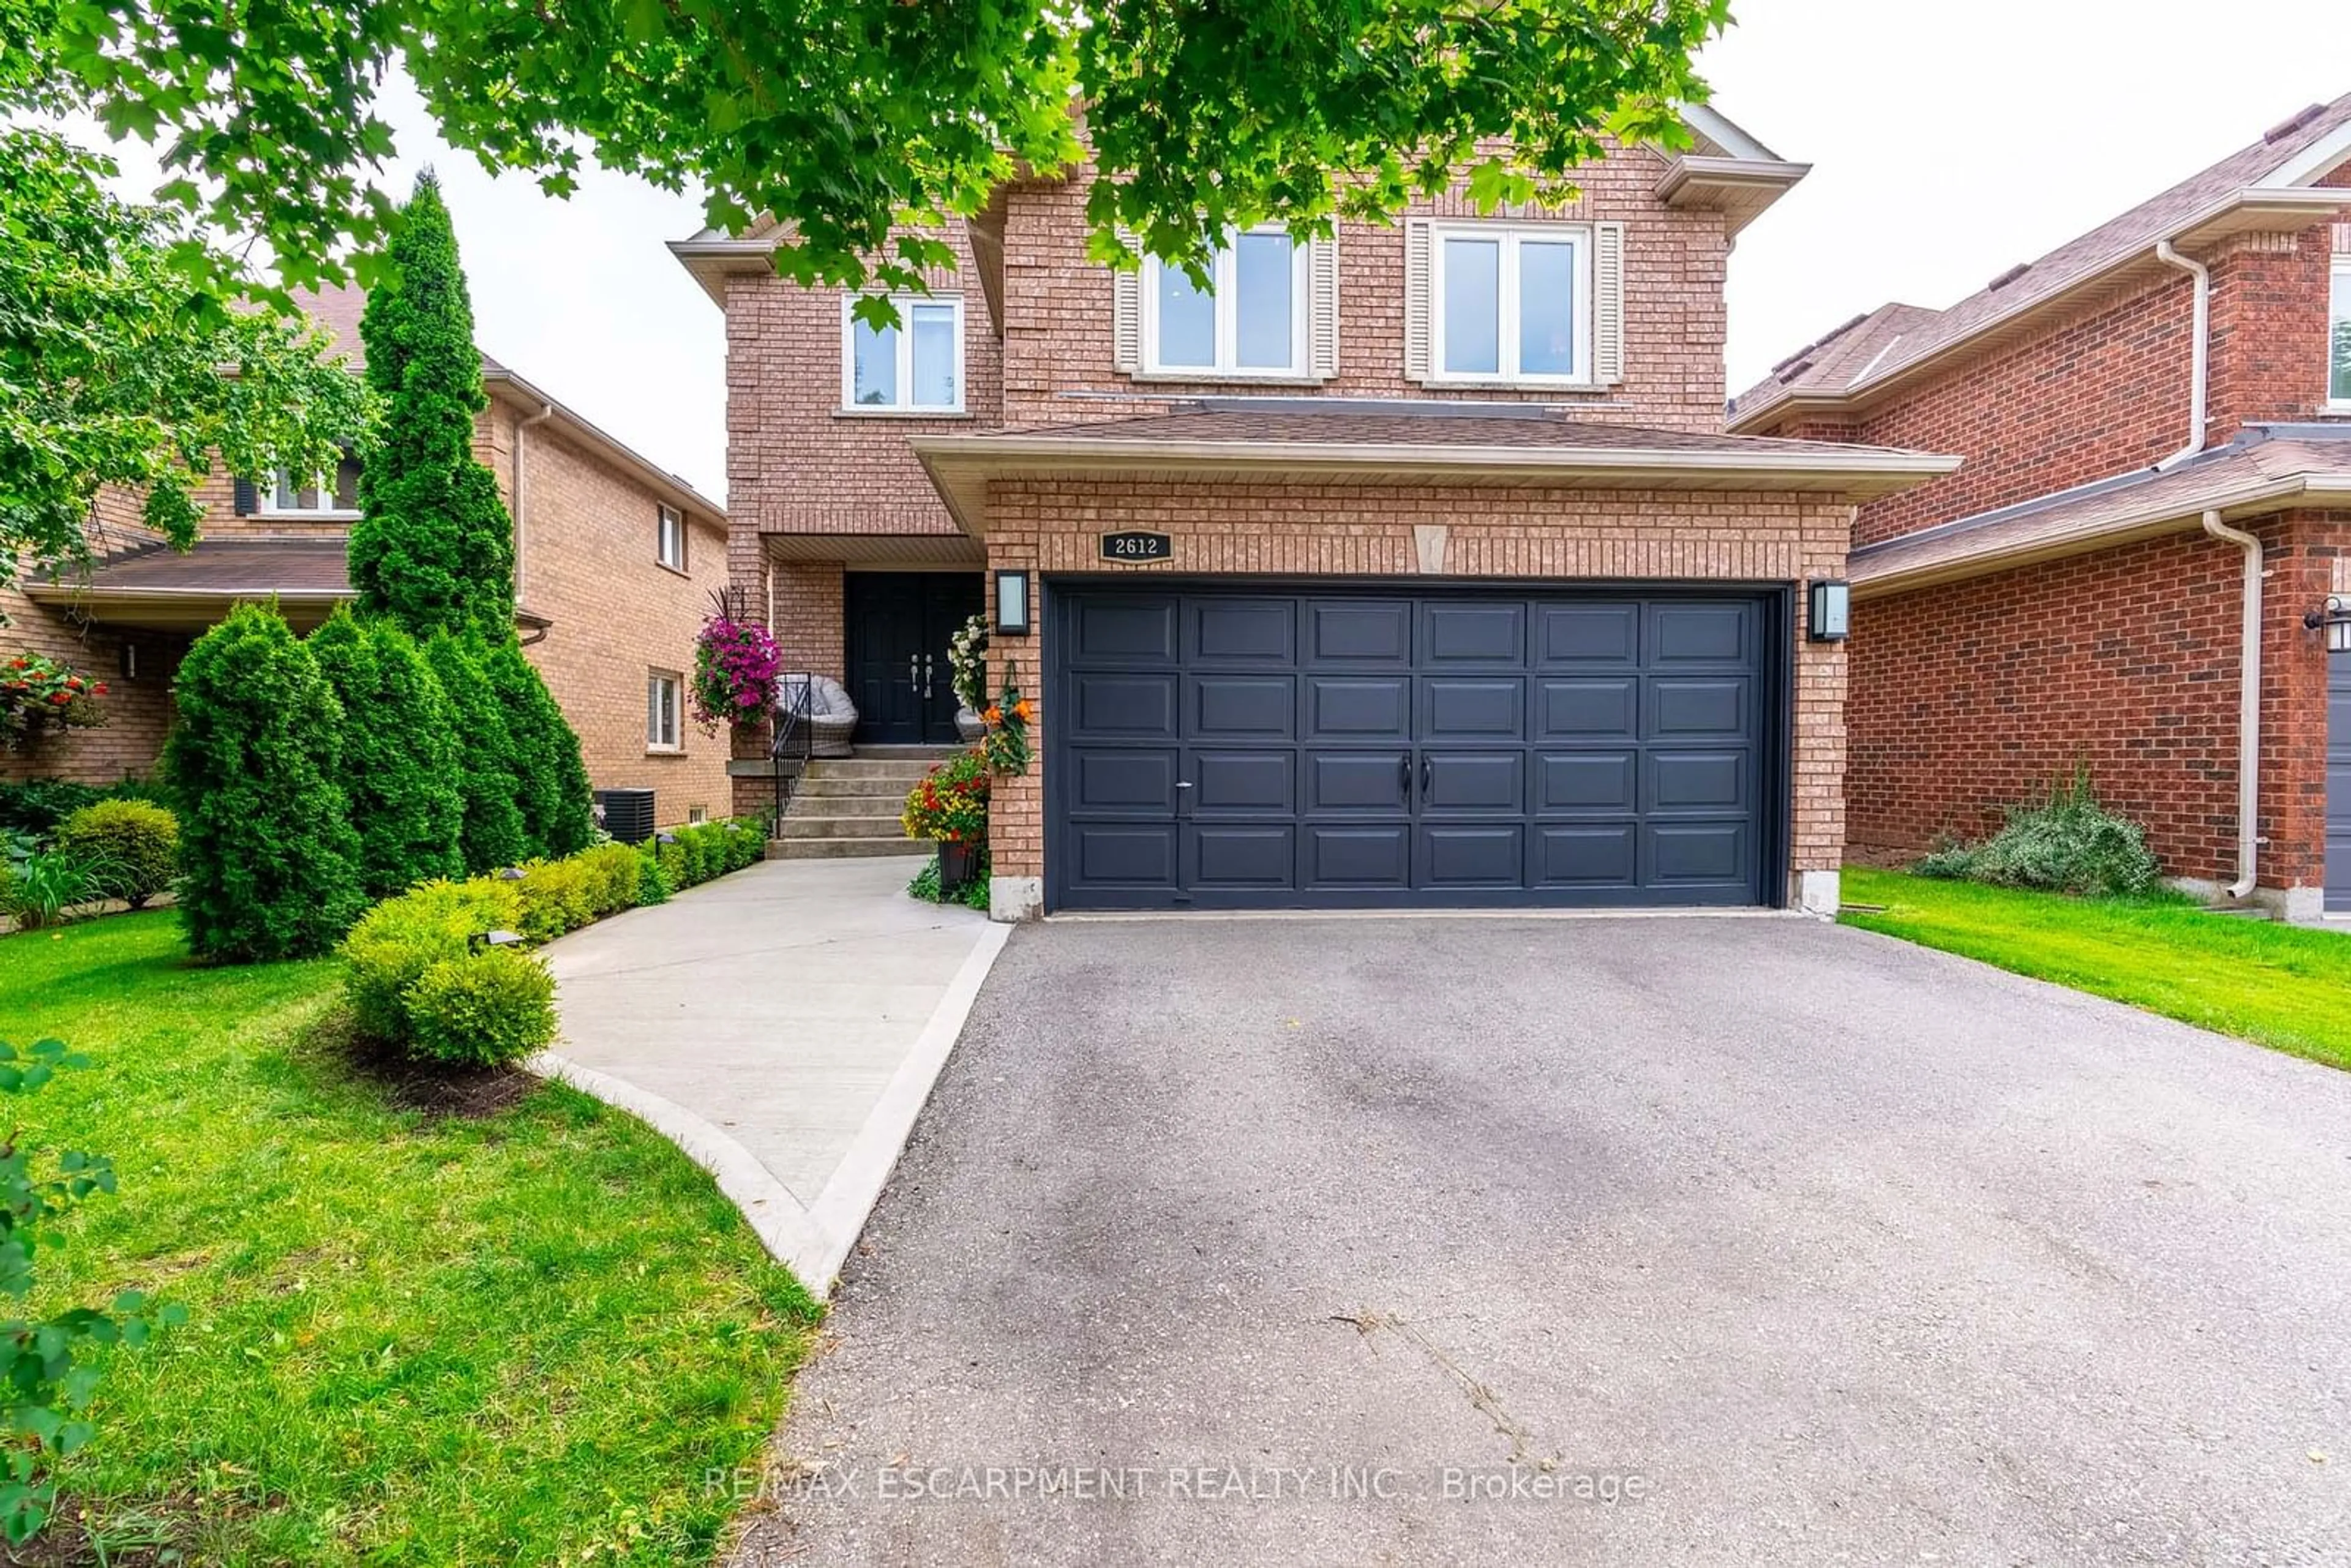 Home with brick exterior material for 2612 Andover Rd, Oakville Ontario L6H 6C4